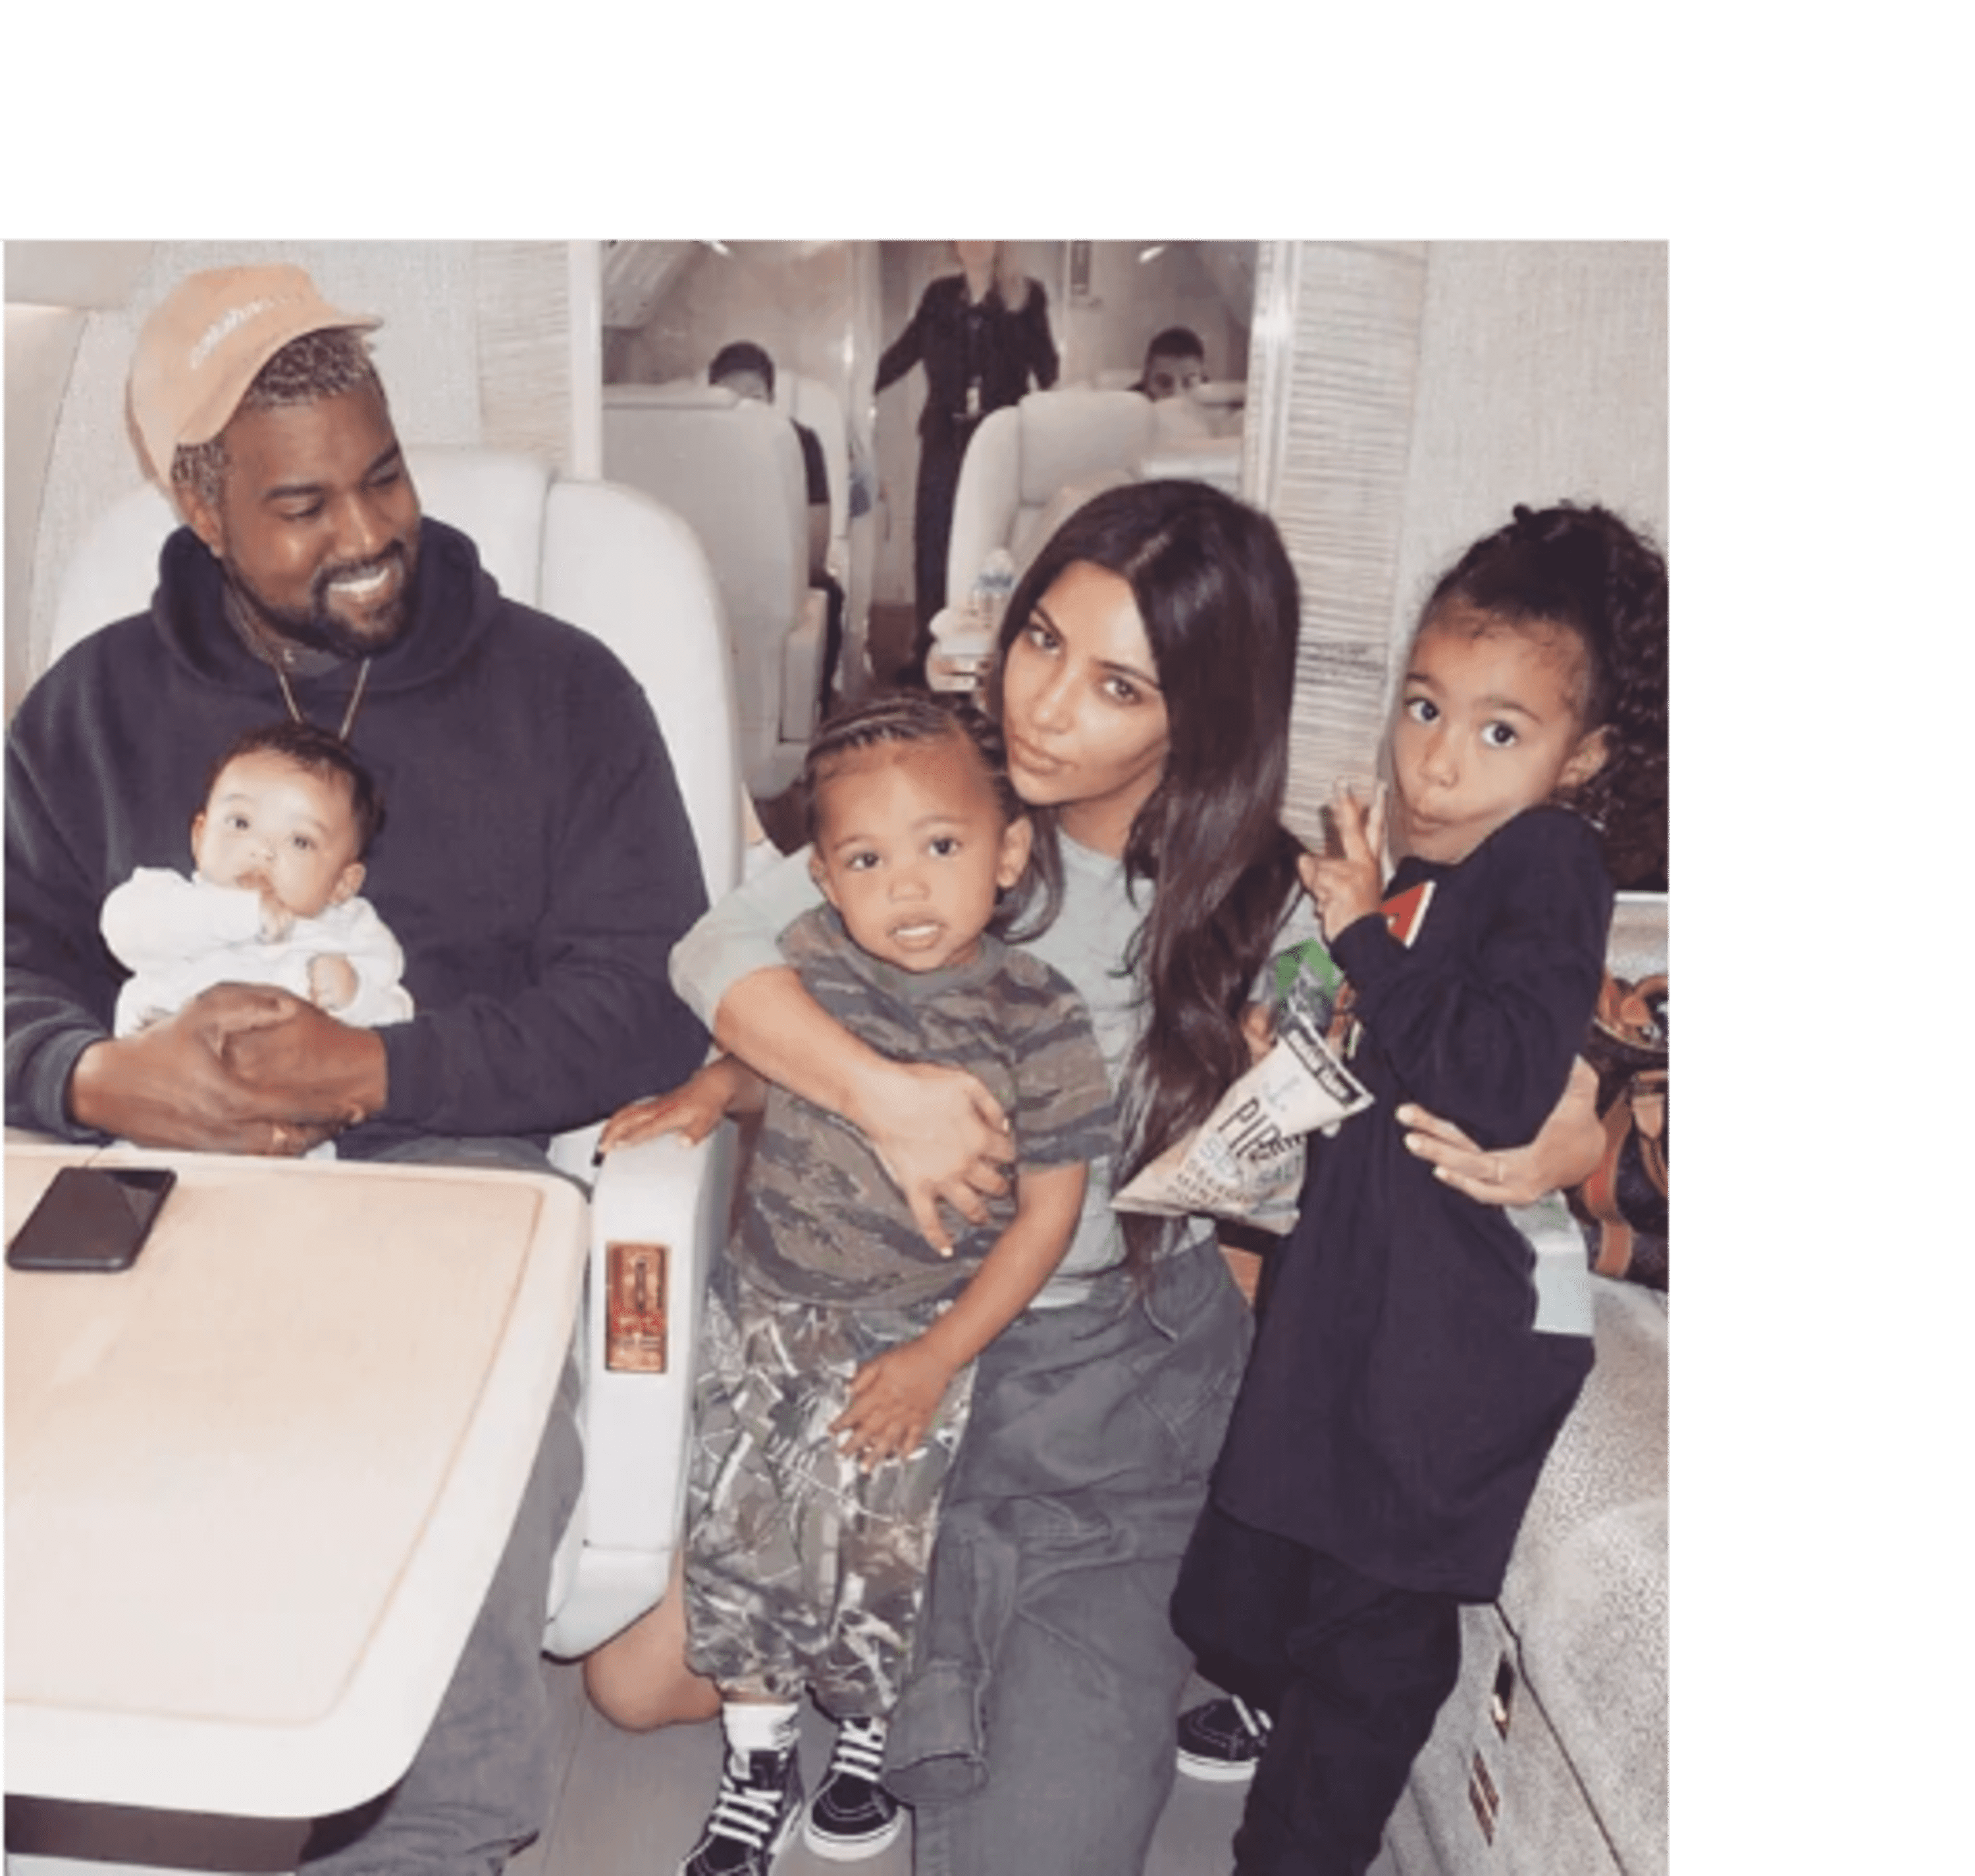 Kanye West speaks candidly to Kim Kardashian and estimates that she is the primary caregiver for her children 80% of the time